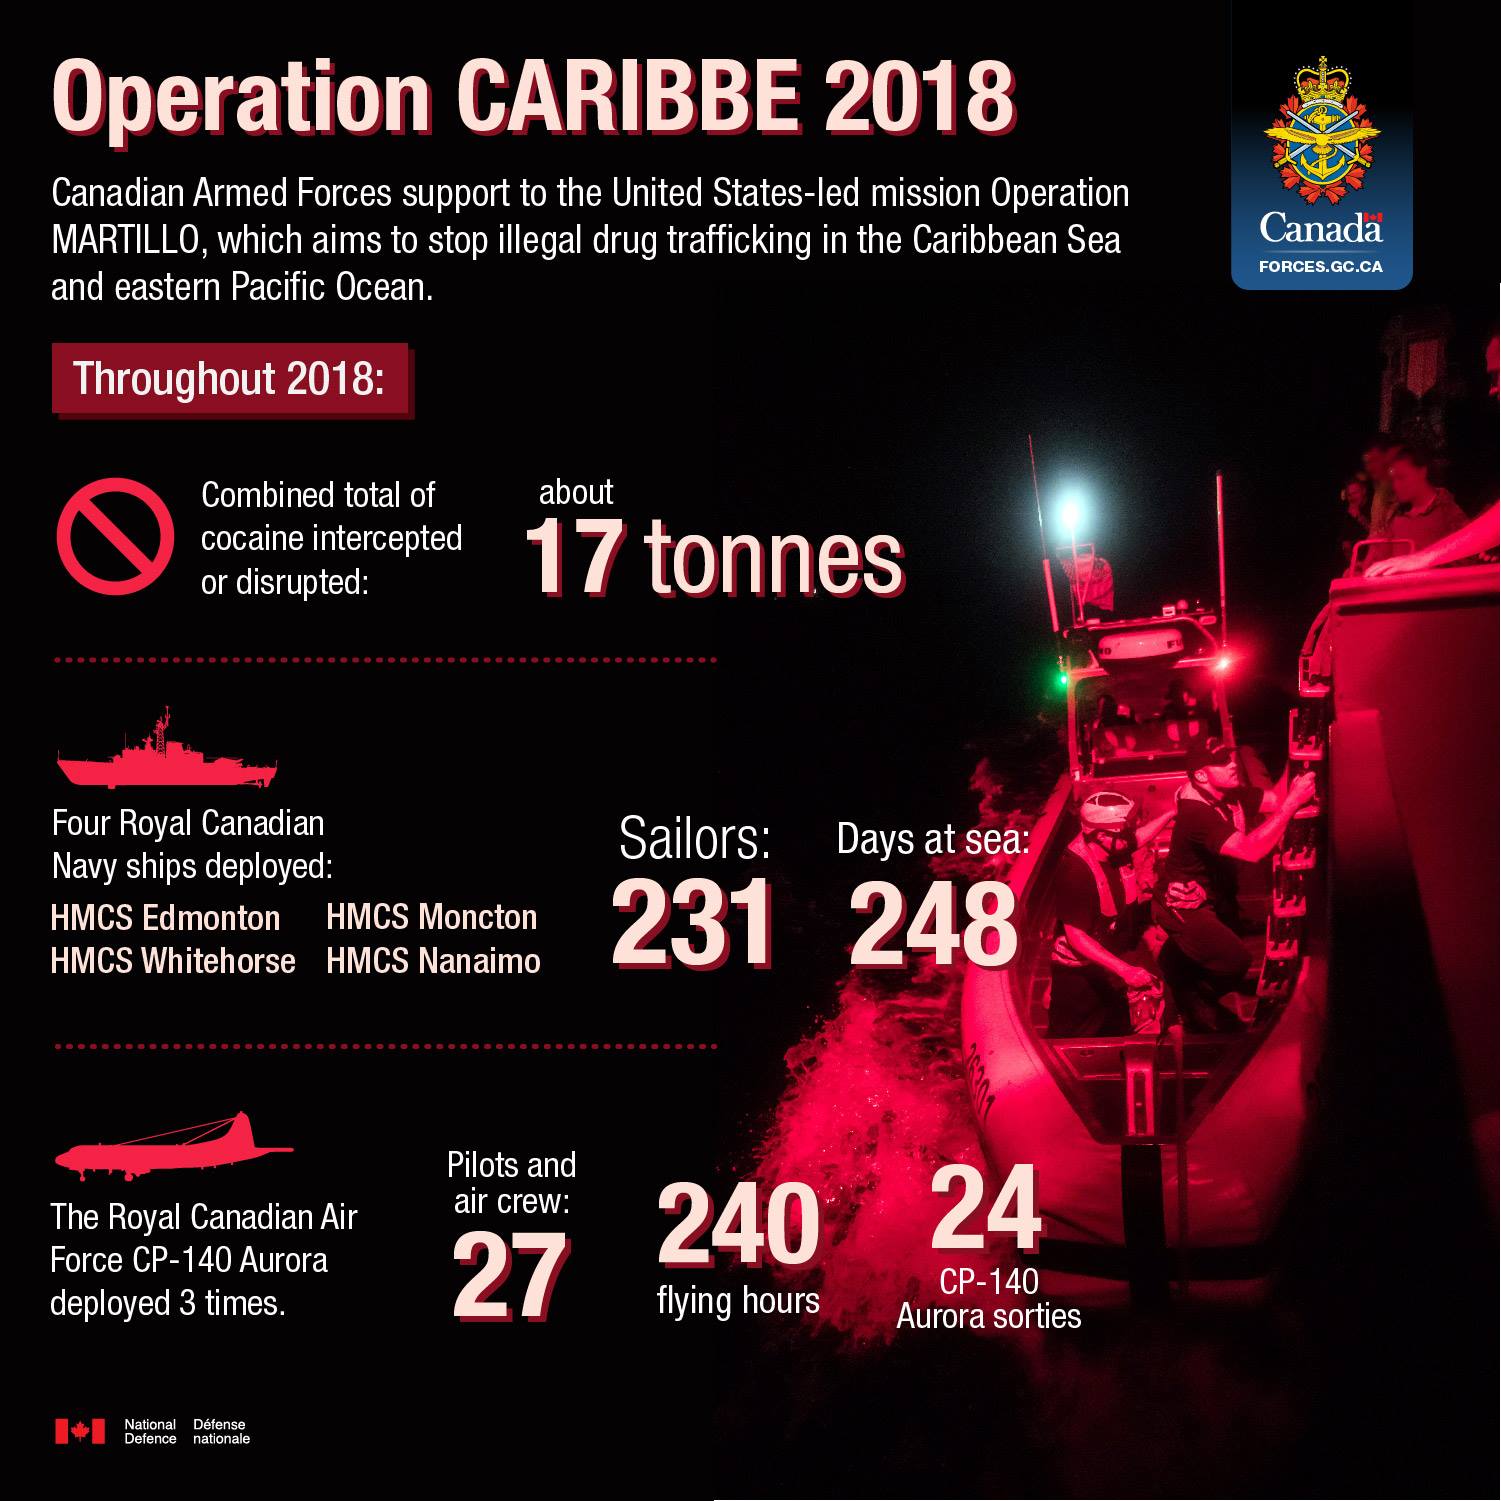 CAF support the United States-led mission Operation MARTILLO, which aims to stop illegal drug trafficking in the Caribbean Sea and eastern Pacific Ocean.